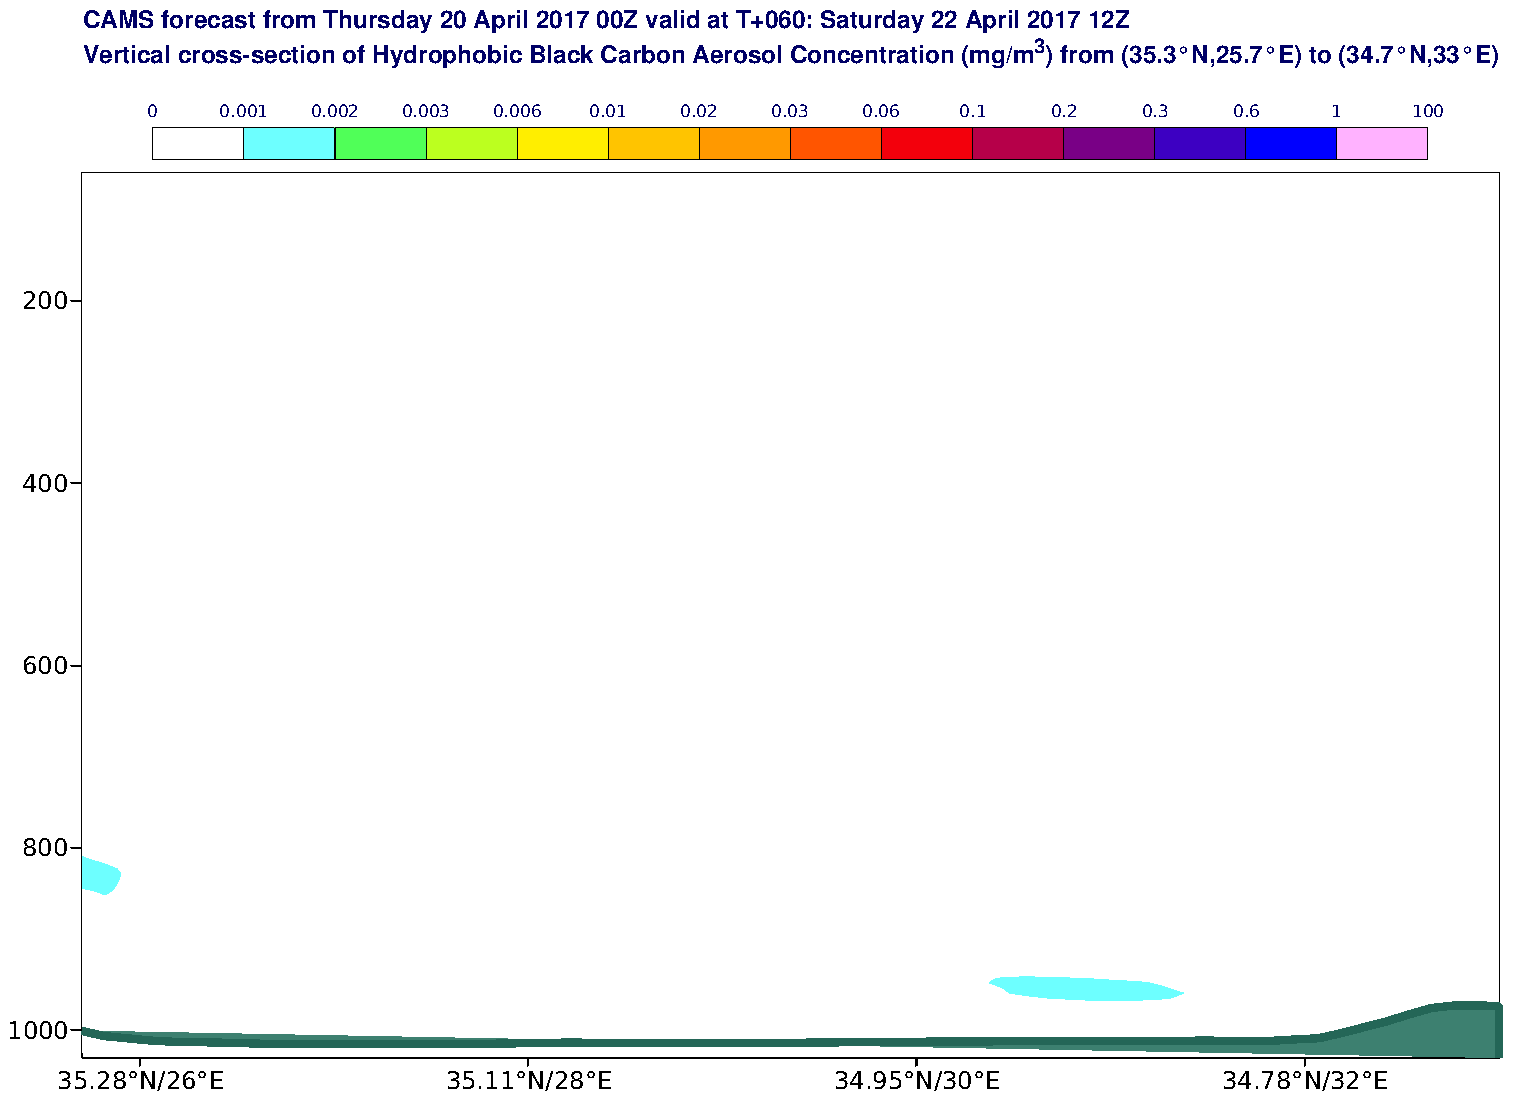 Vertical cross-section of Hydrophobic Black Carbon Aerosol Concentration (mg/m3) valid at T60 - 2017-04-22 12:00